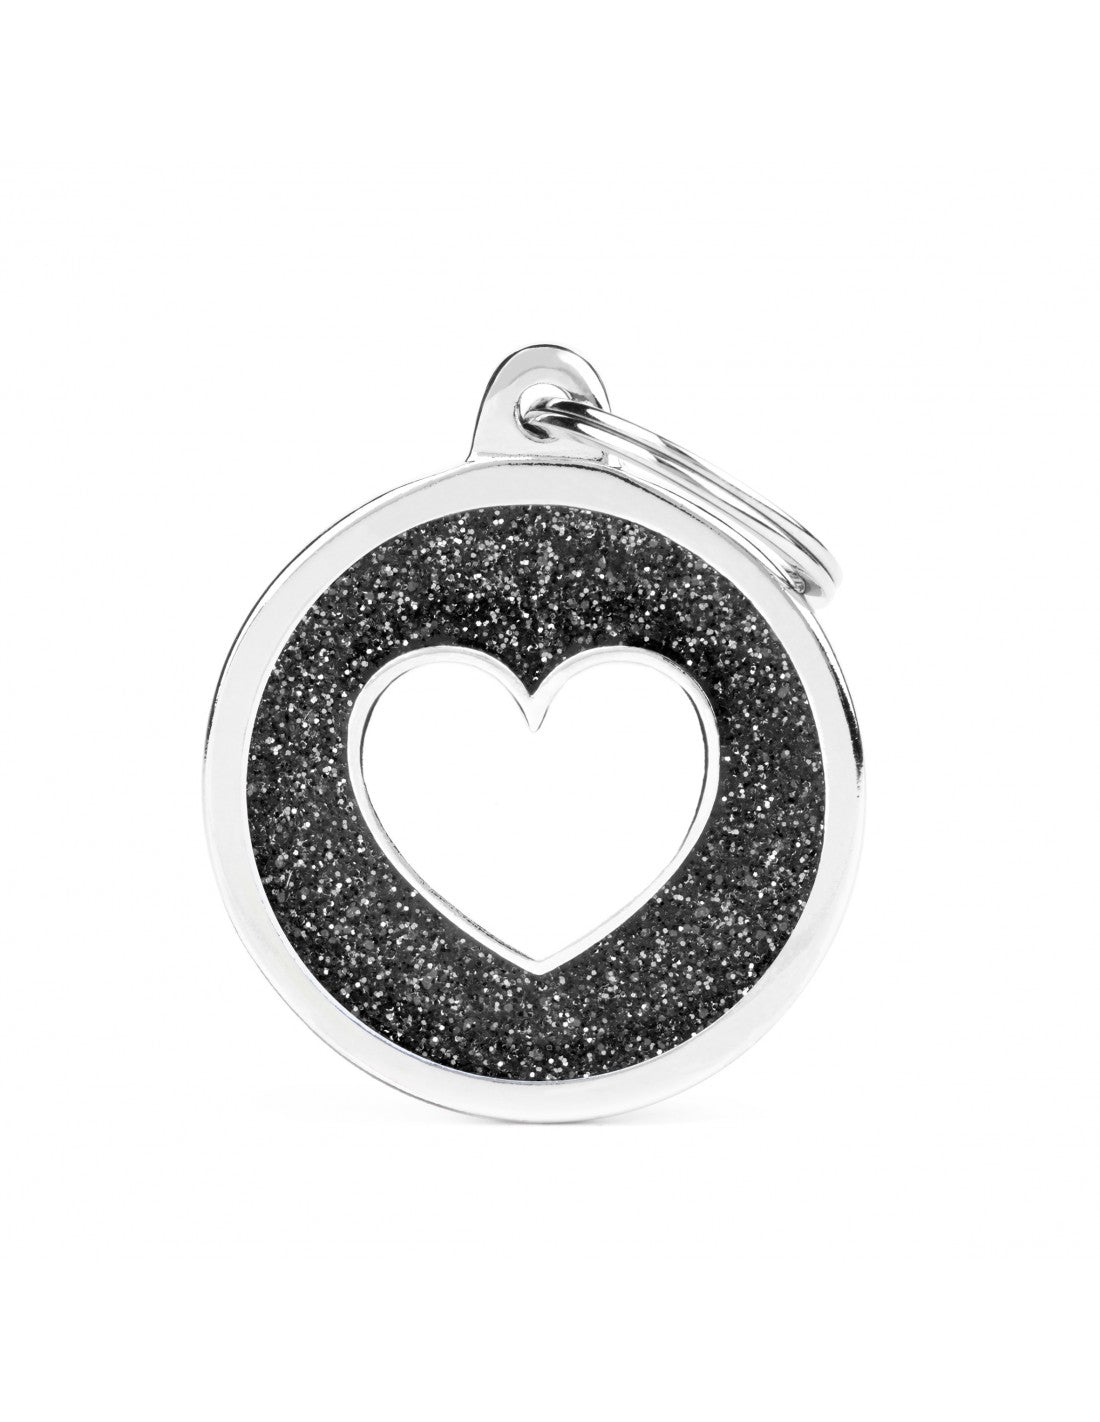 MyFamily Circle Glitter Tag Black with White Heart - Mutts & Co.